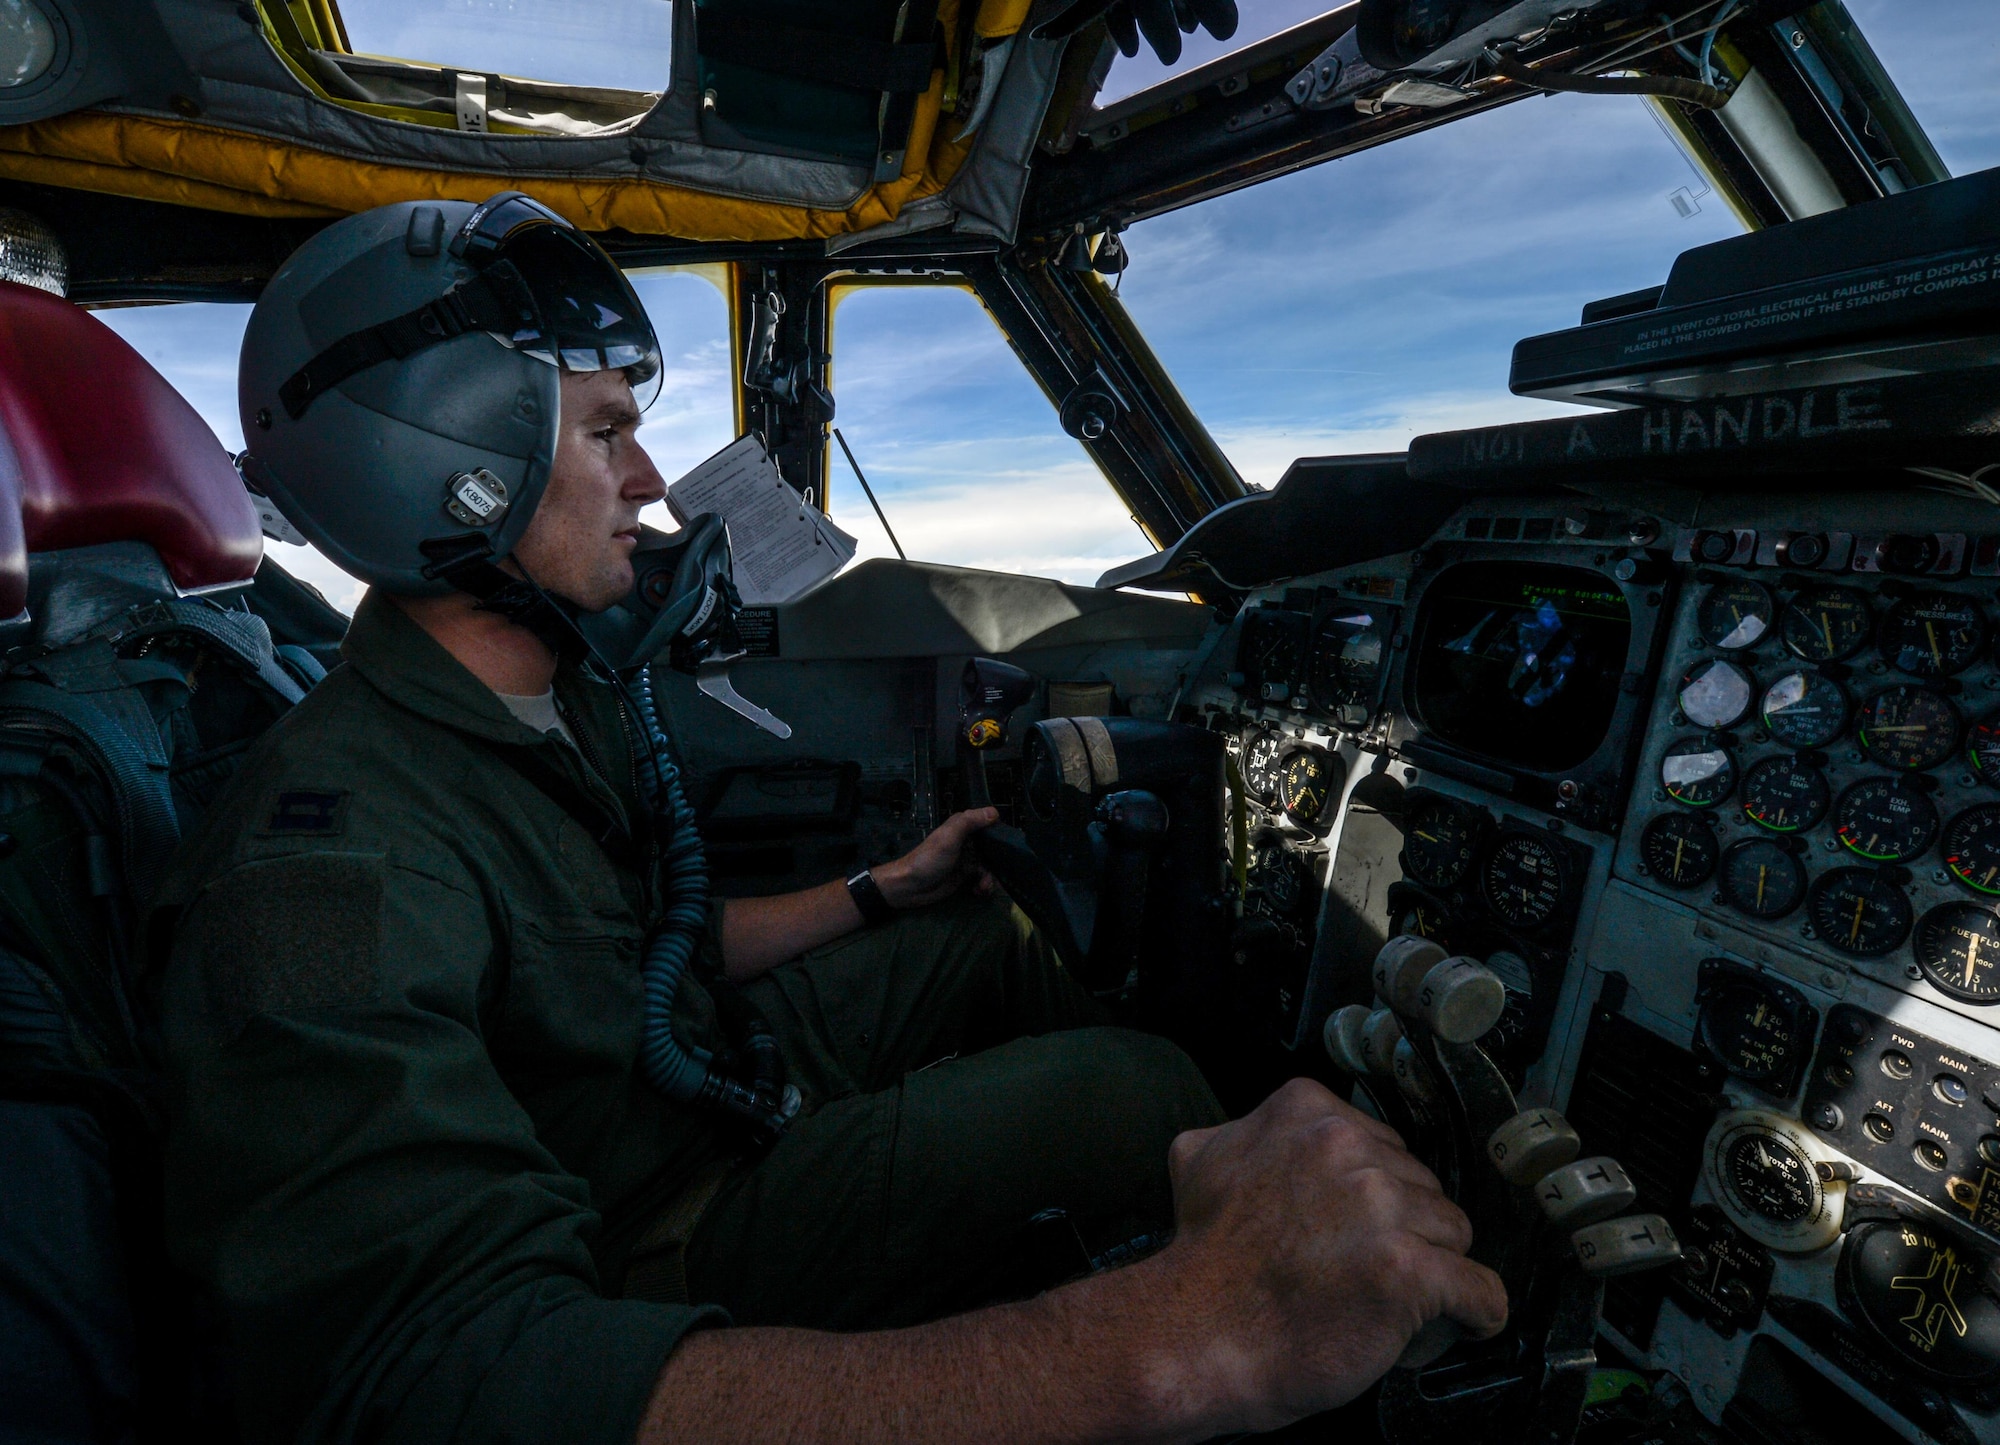 Capt. Lance Adsit, 20th Bomb Squadron pilot, observes a target during a simulated weapon release from the airspace above the Gulf of Mexico Oct. 13, 2016. The B-52 Stratofortress piloted by Adsit flew with another B-52 from Barksdale Air Force Base, La., and two B-1 Lancers from Dyess Air Force Base, Texas, as part of a weapons school integration exercise. (U.S. Air Force photo/Senior Airman Curt Beach)